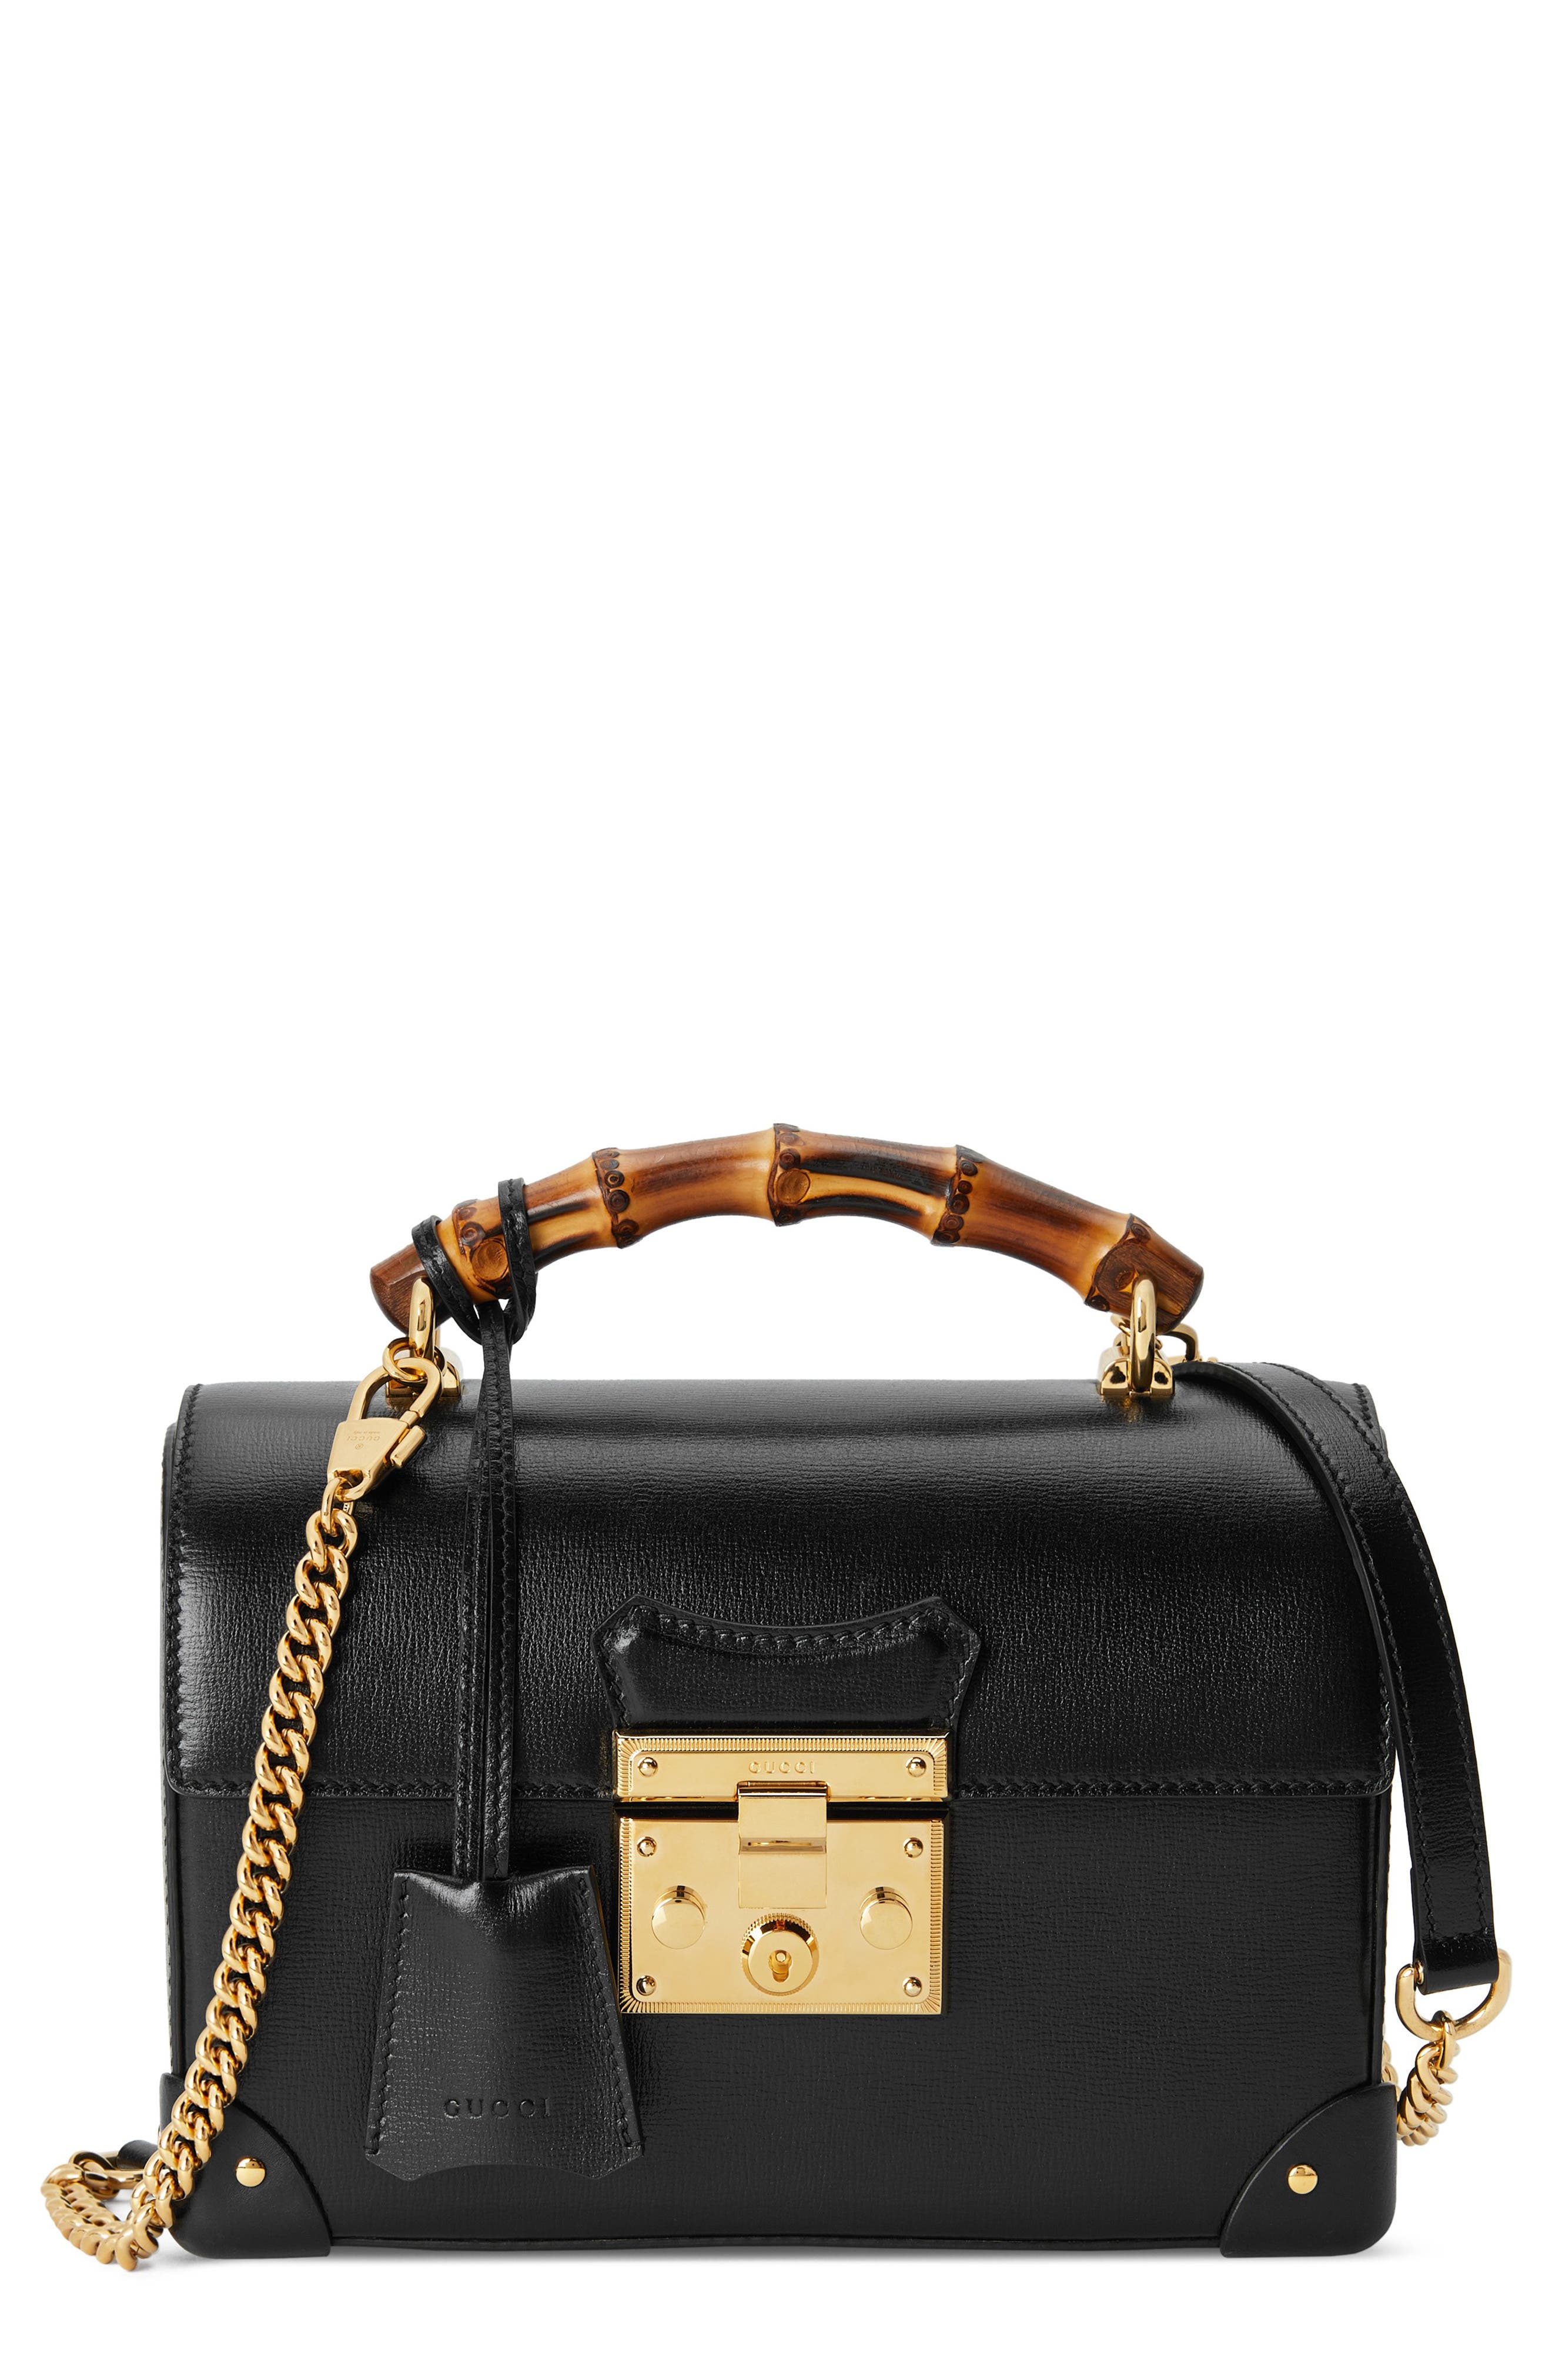 gucci with bamboo handle